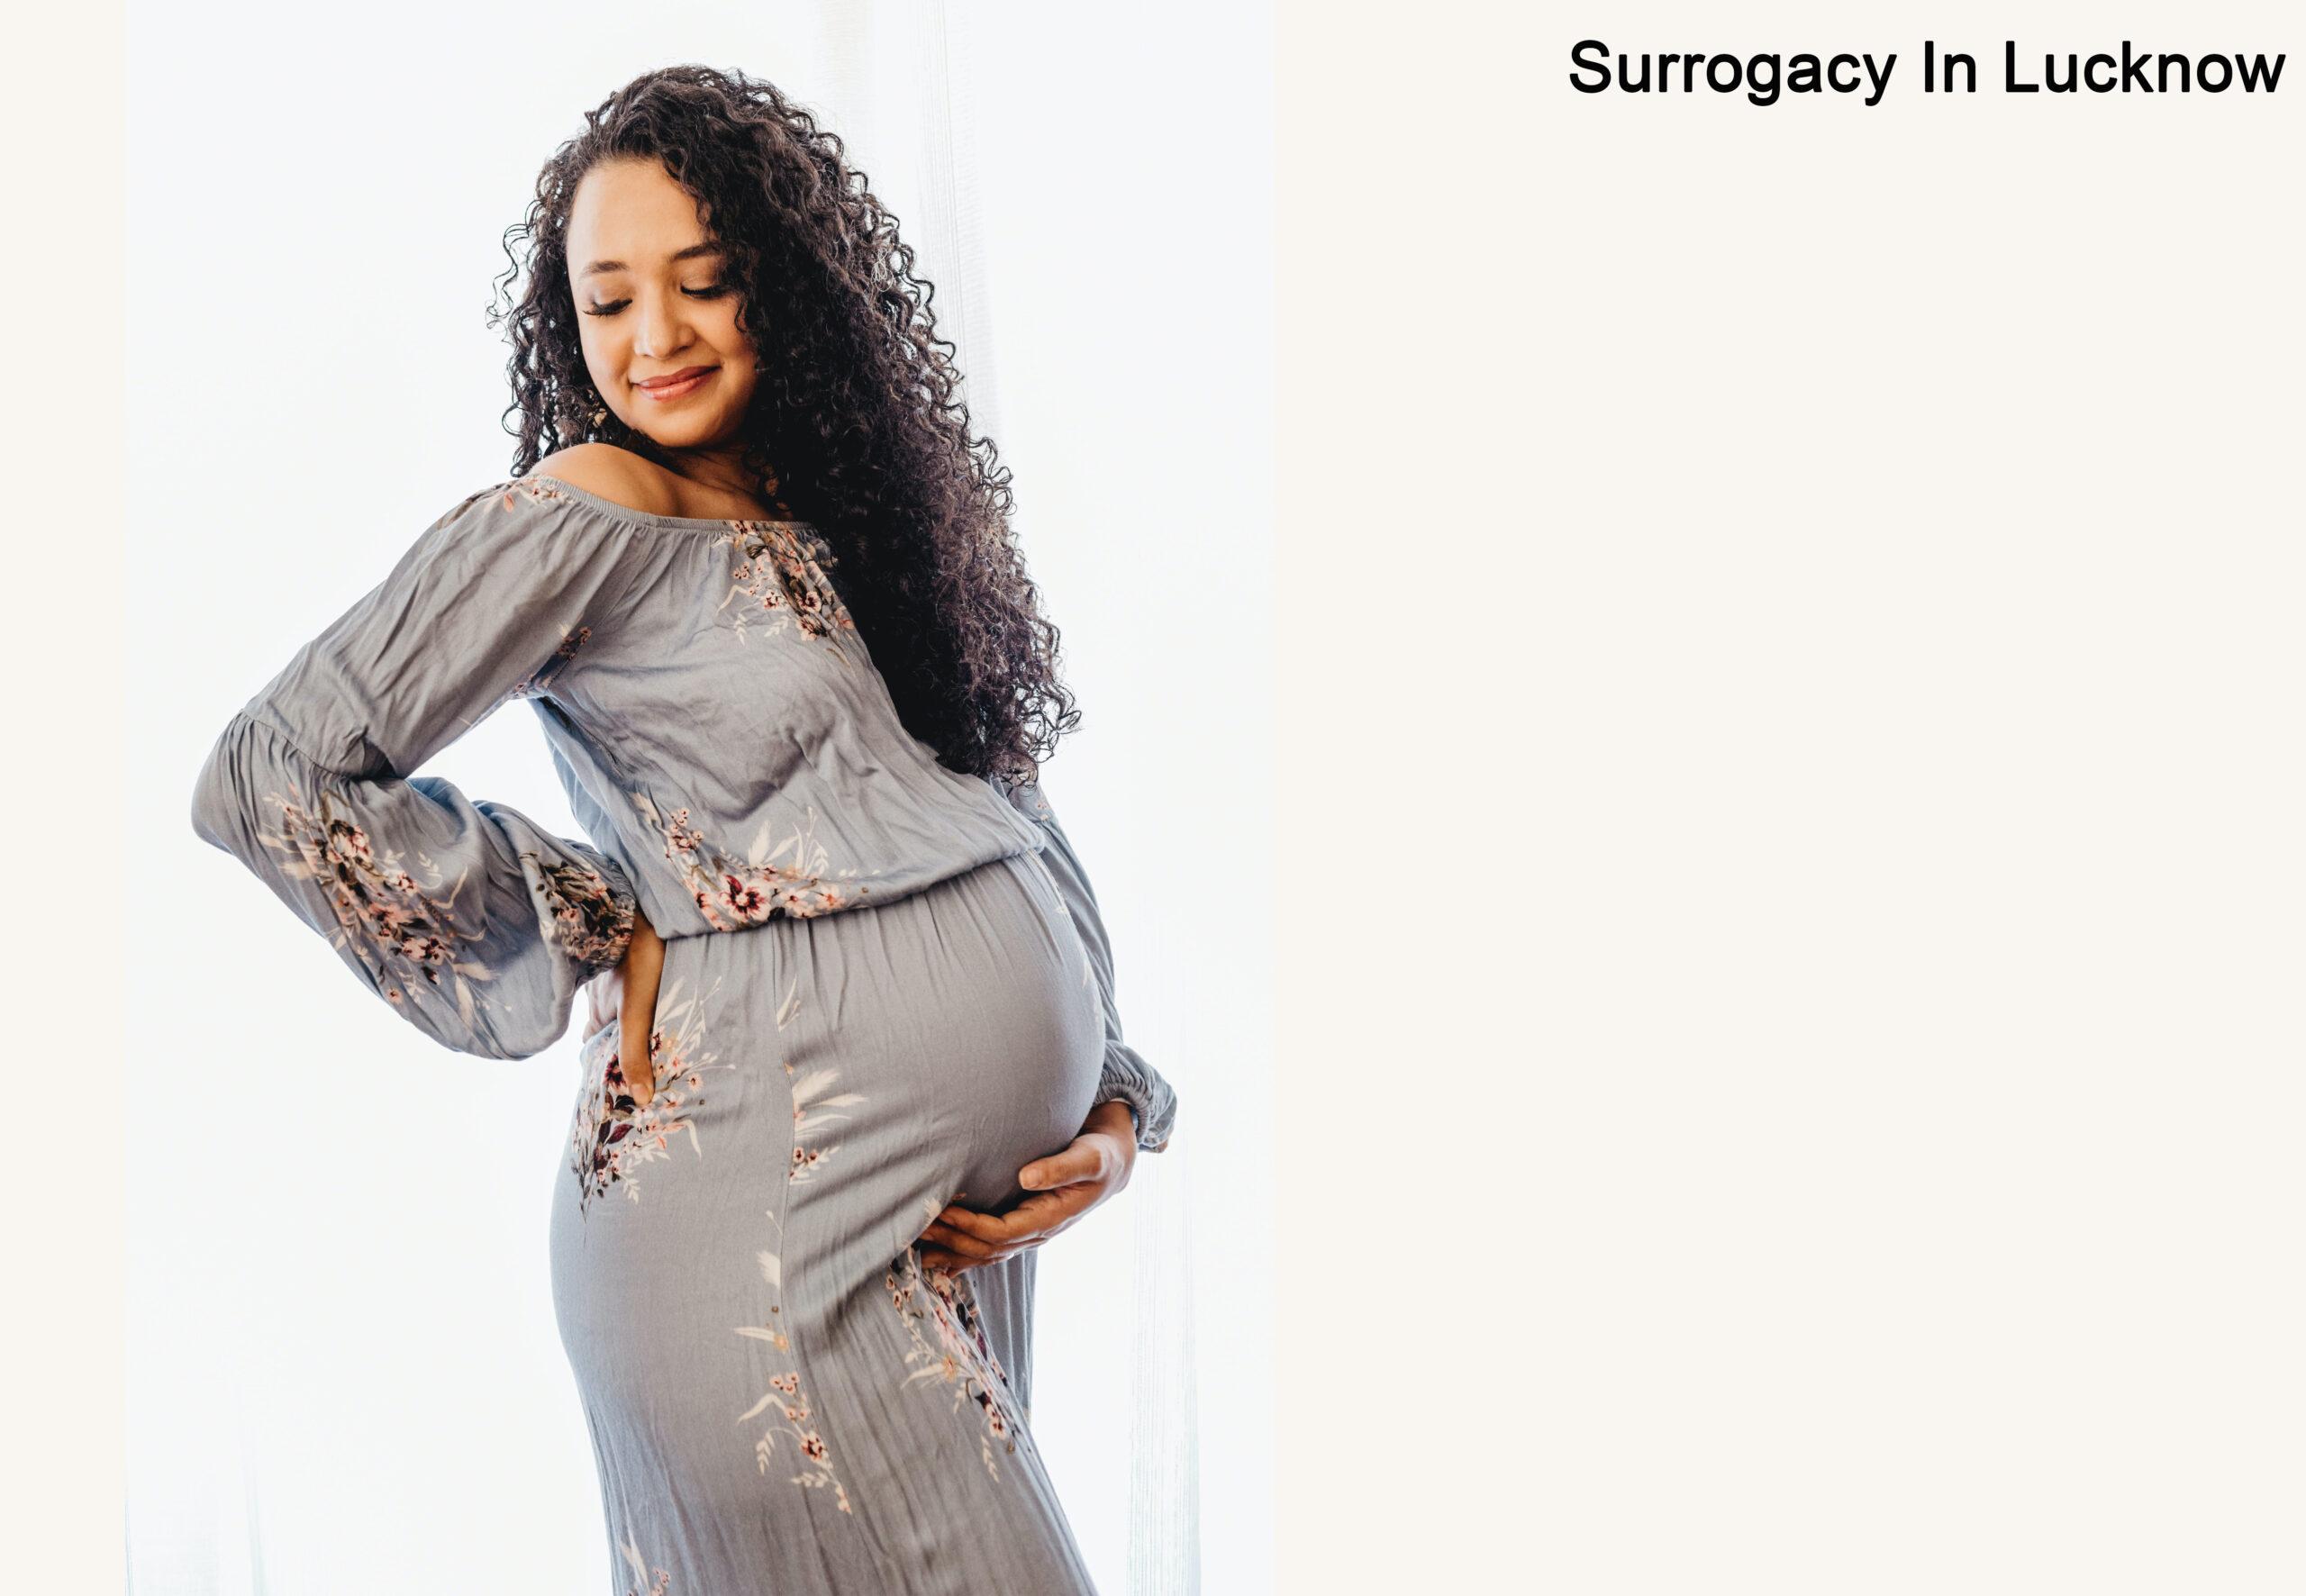 Surrogacy in Lucknow